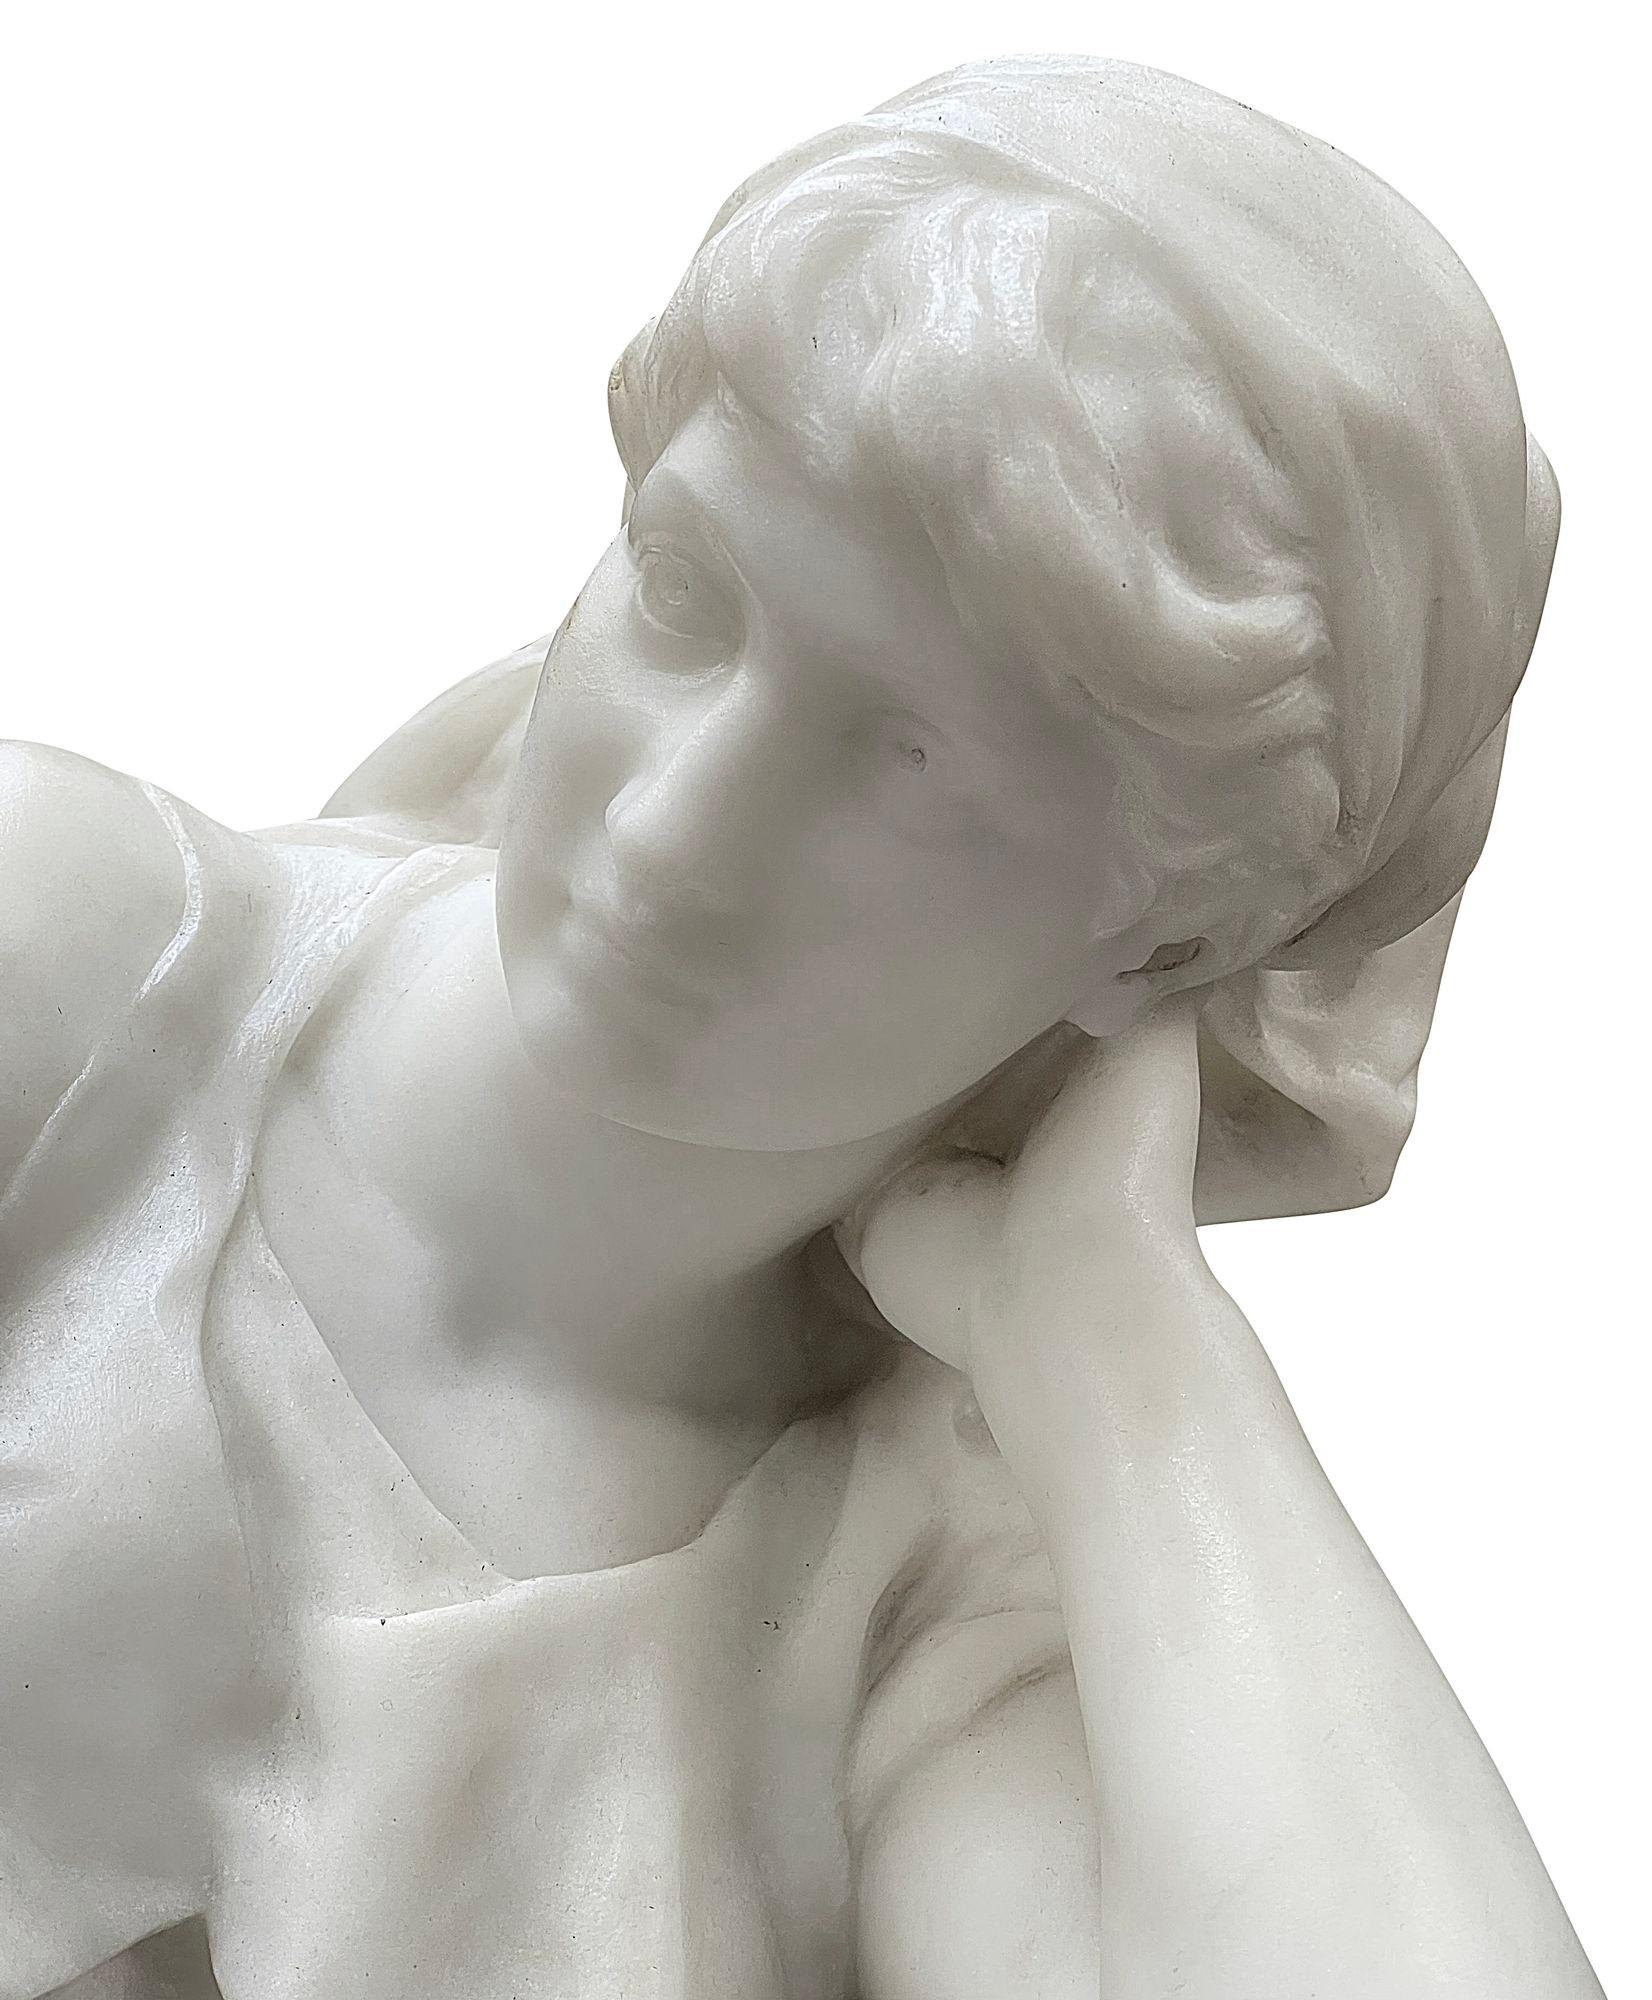 An enchanting 19th Century Carrera marble statue of a young girl flower seller resting.

Mathurin Moreau was a French sculptor in the academic style. Moreau was born in Dijon, first exhibited in the 1848 Salon, and finally received a medal of honor